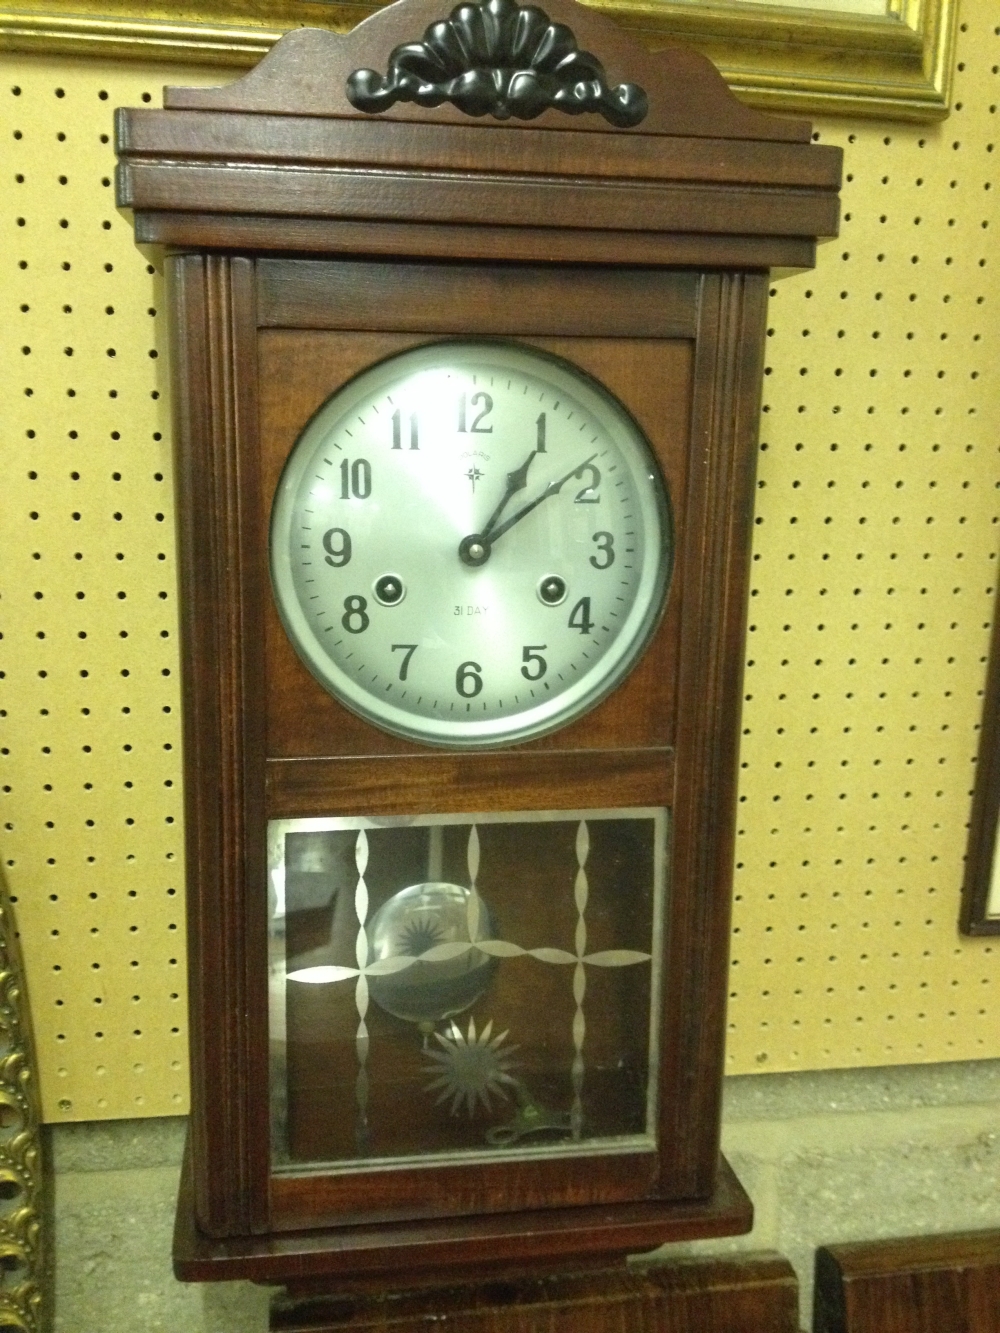 A Polaris 31 day wall clock in working order.